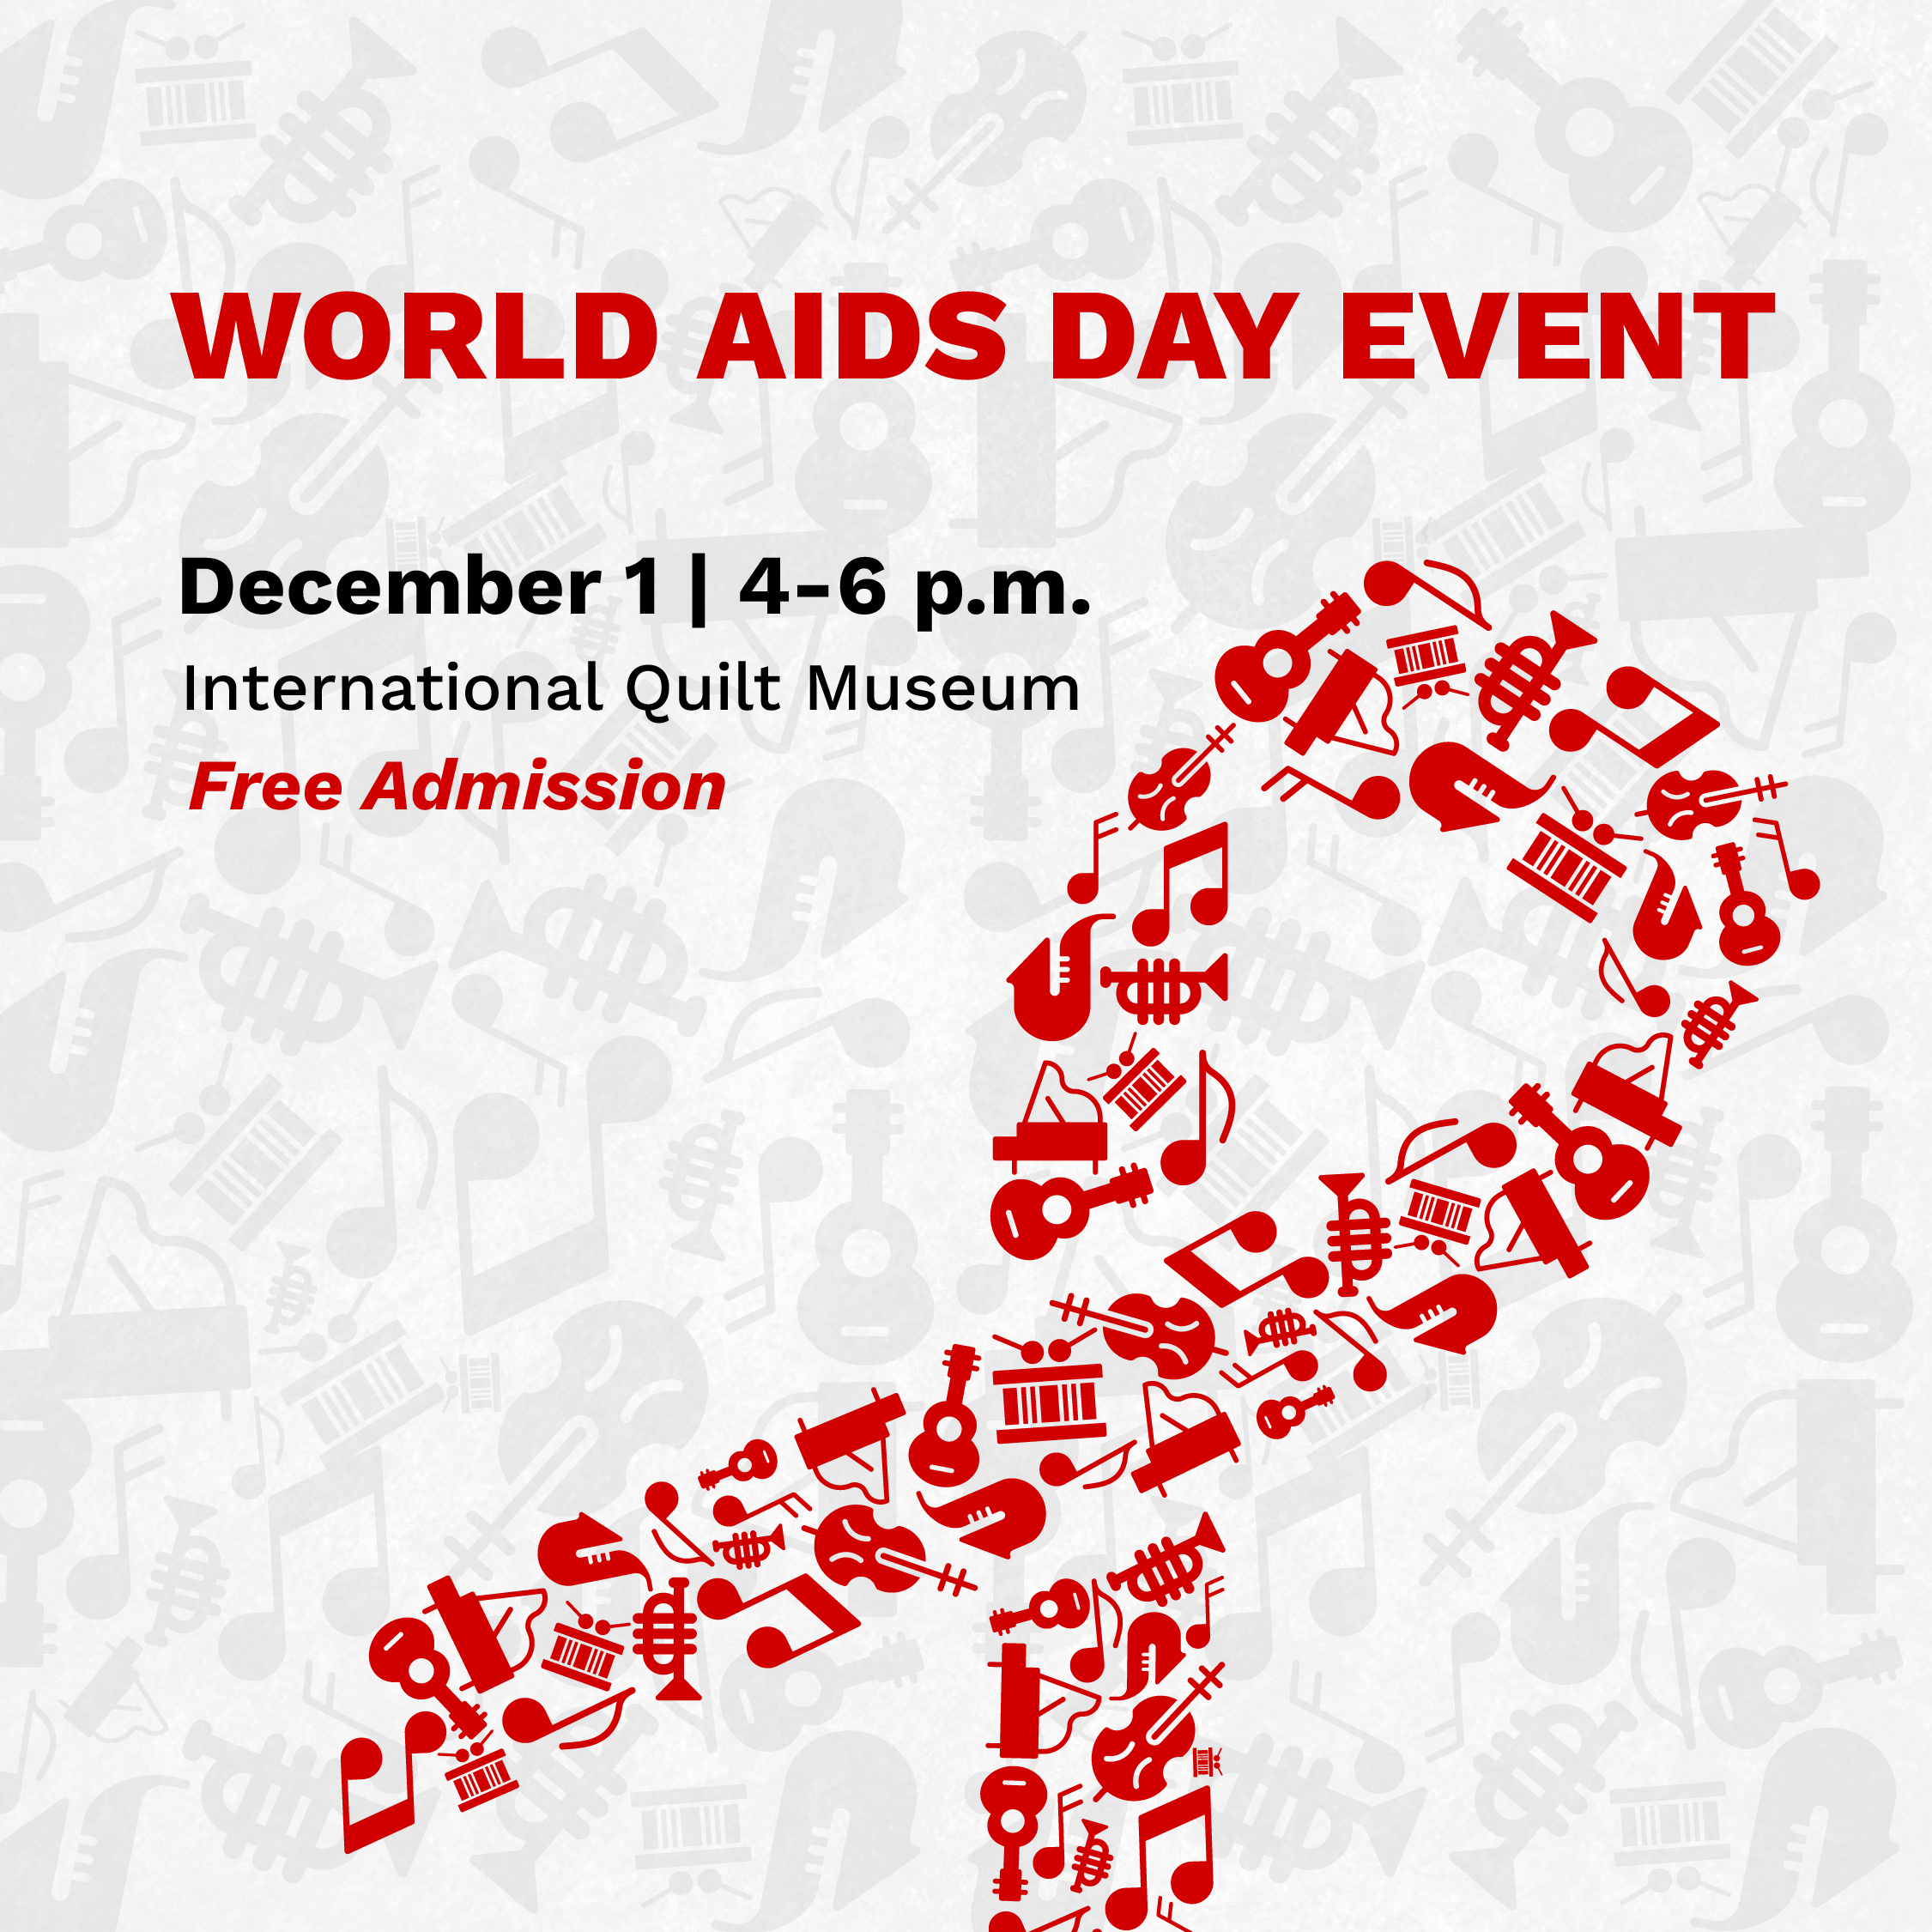 The Glenn Korff School of Music is organizing a special World AIDS Day Concert on Dec. 1 at the International Quilt Museum.